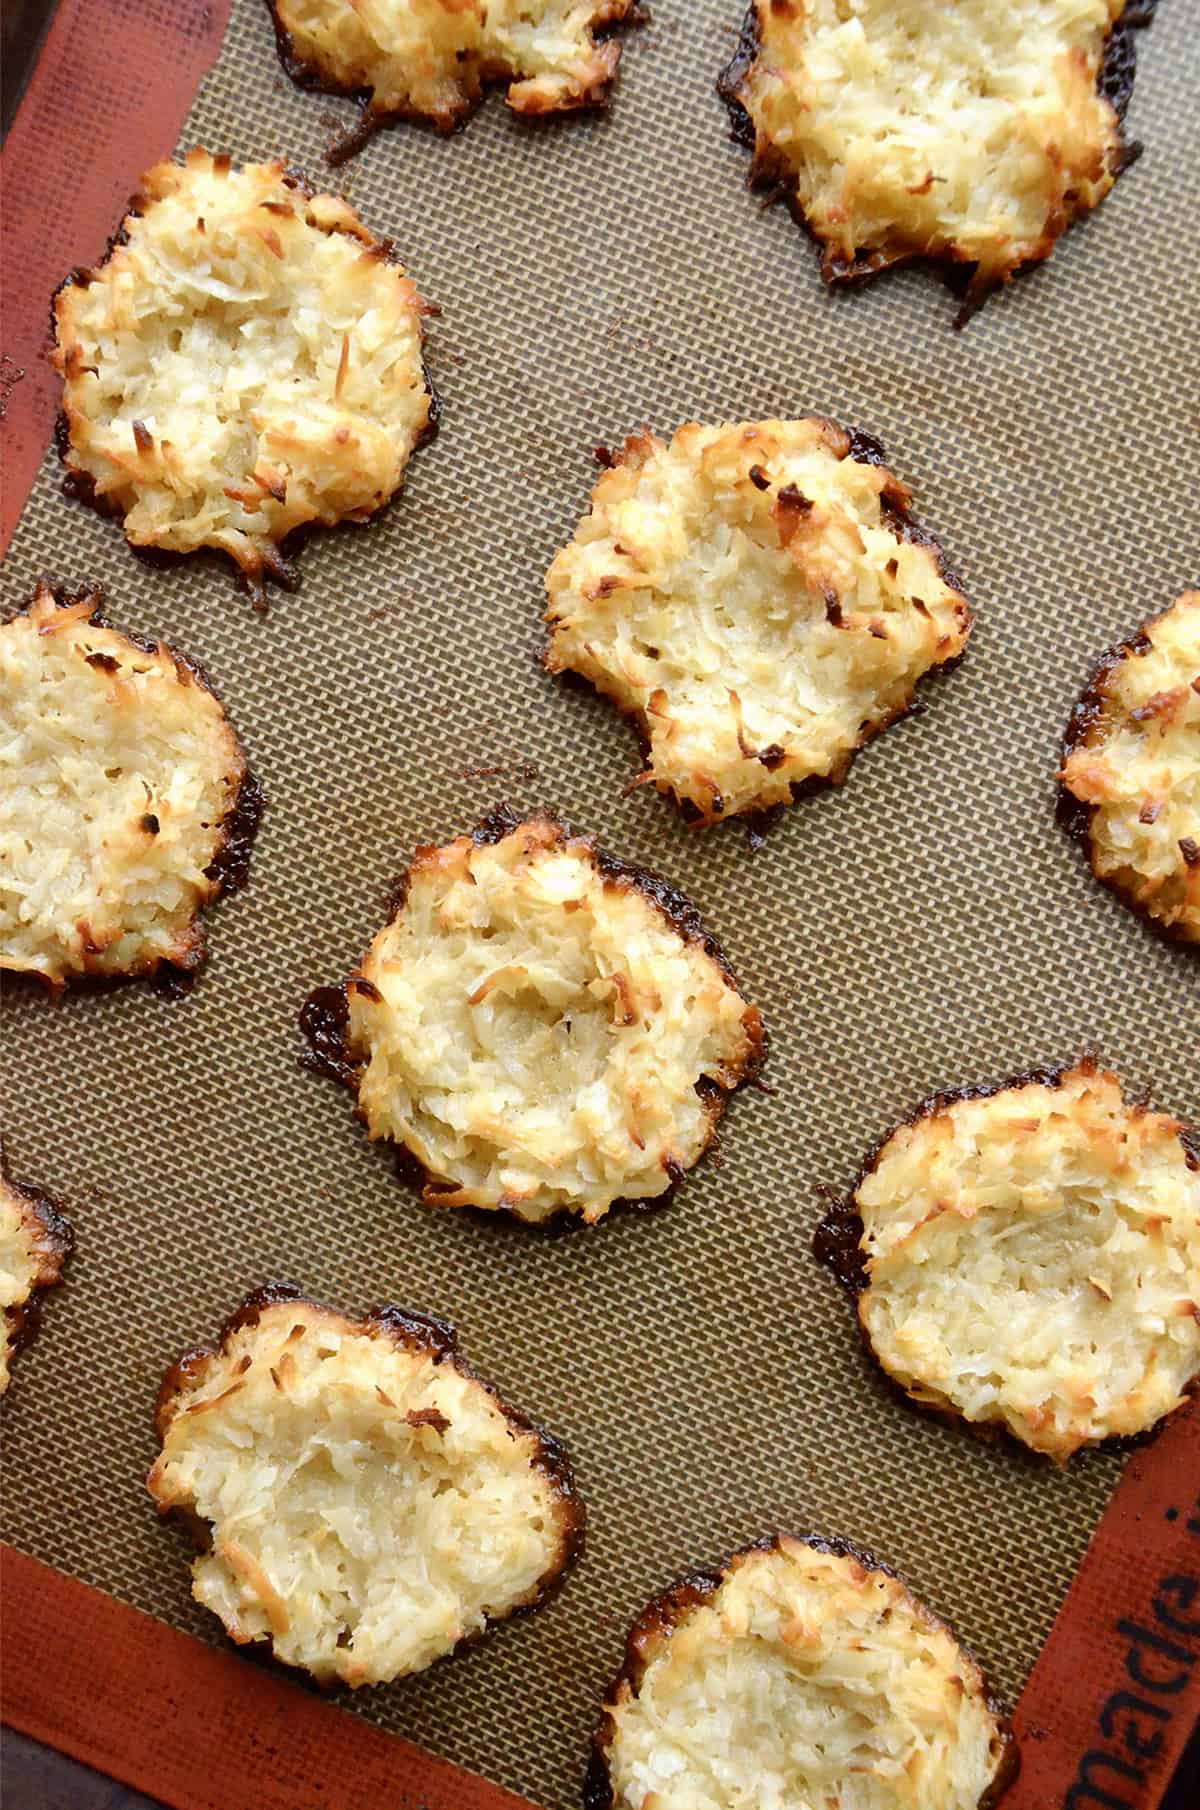 Baked coconut macaroon nests cool on a Silpat baking sheet.